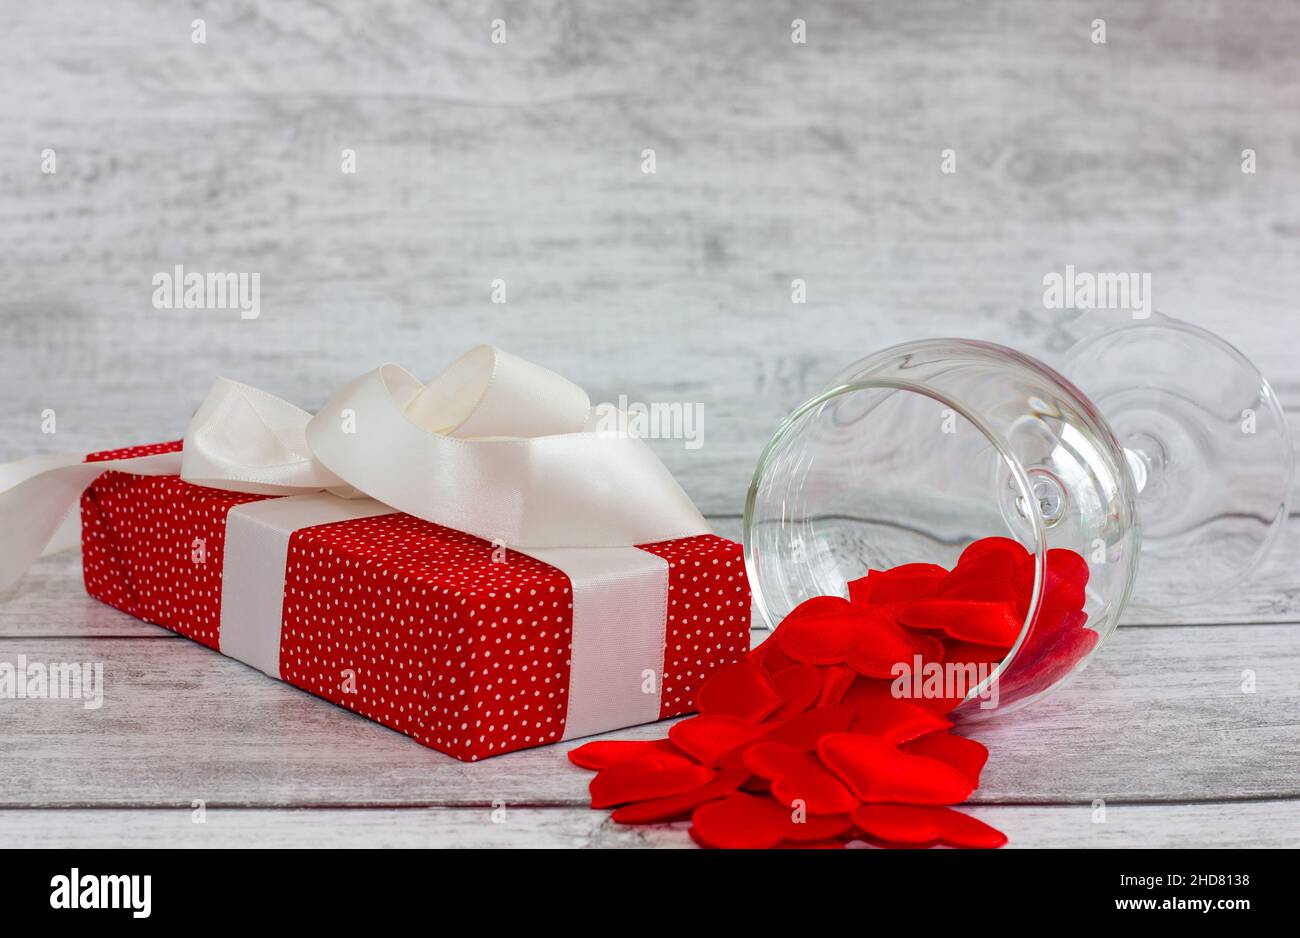 red gift box with pea pattern, white ribbon and heart on wooden background. holiday concept, valentine's day. Stock Photo